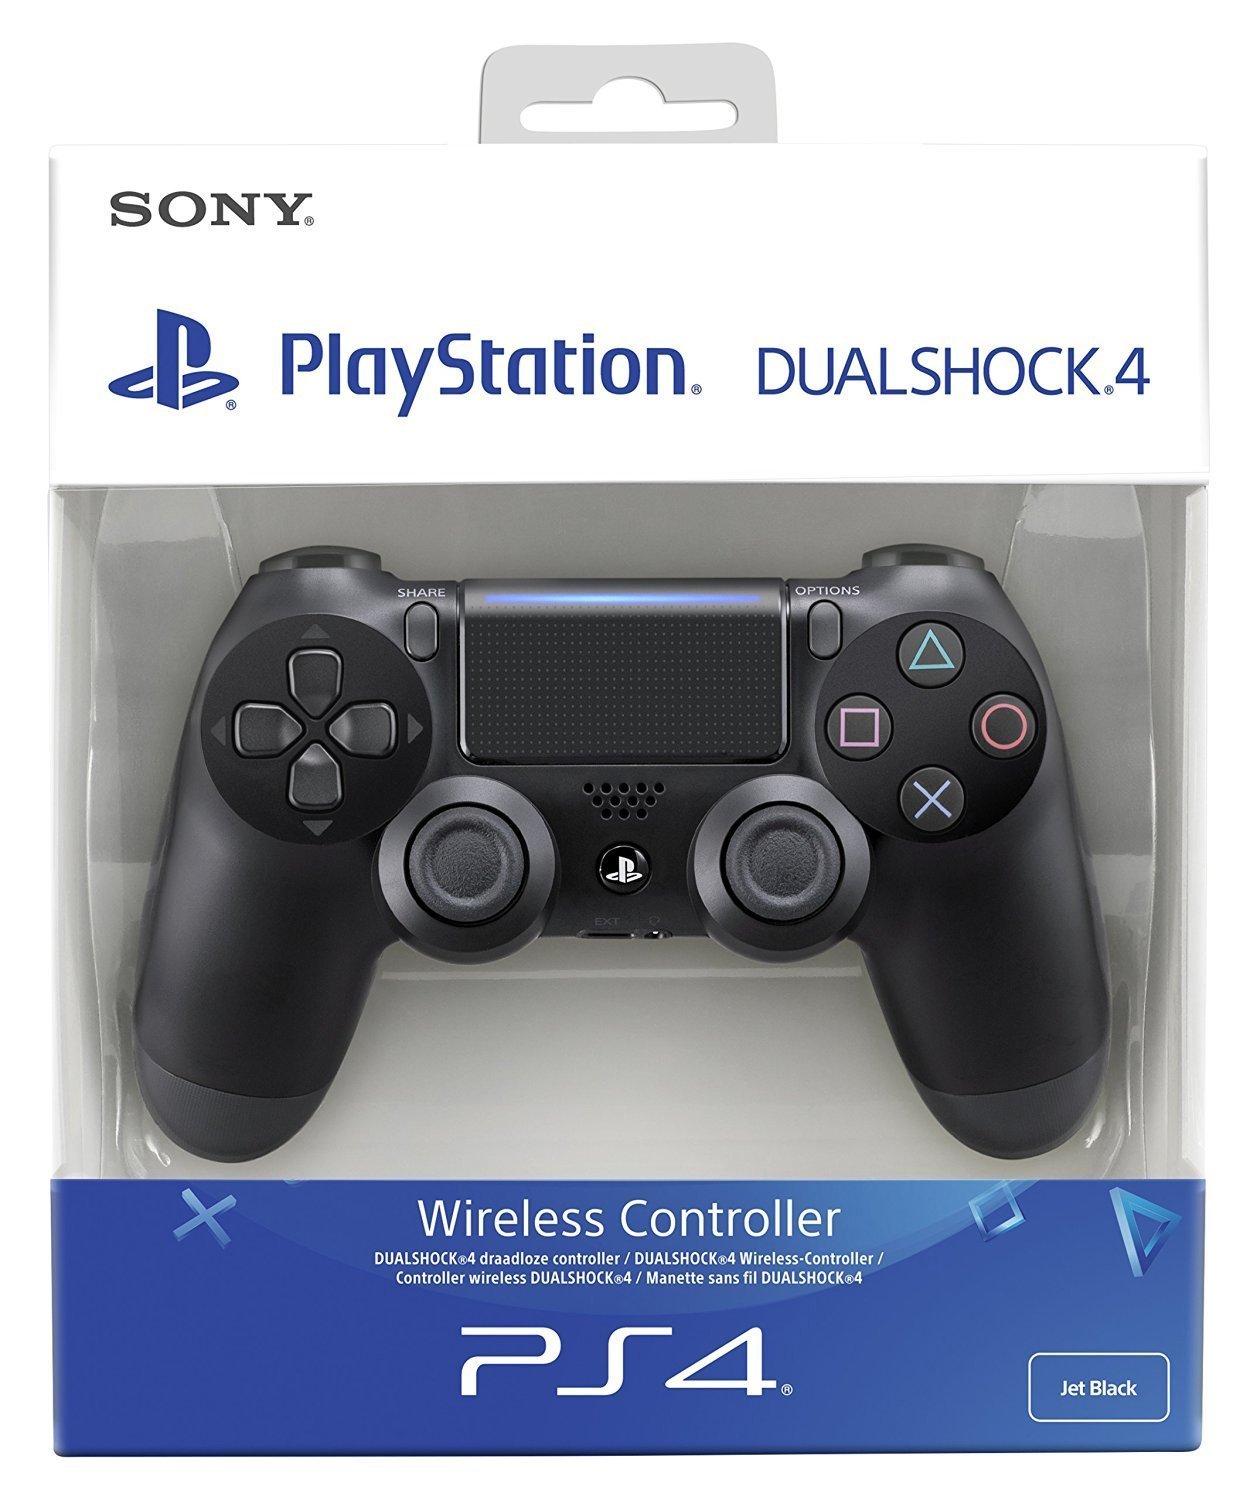 PS4 DualShock Wireless Controller - The Tomorrow Technology